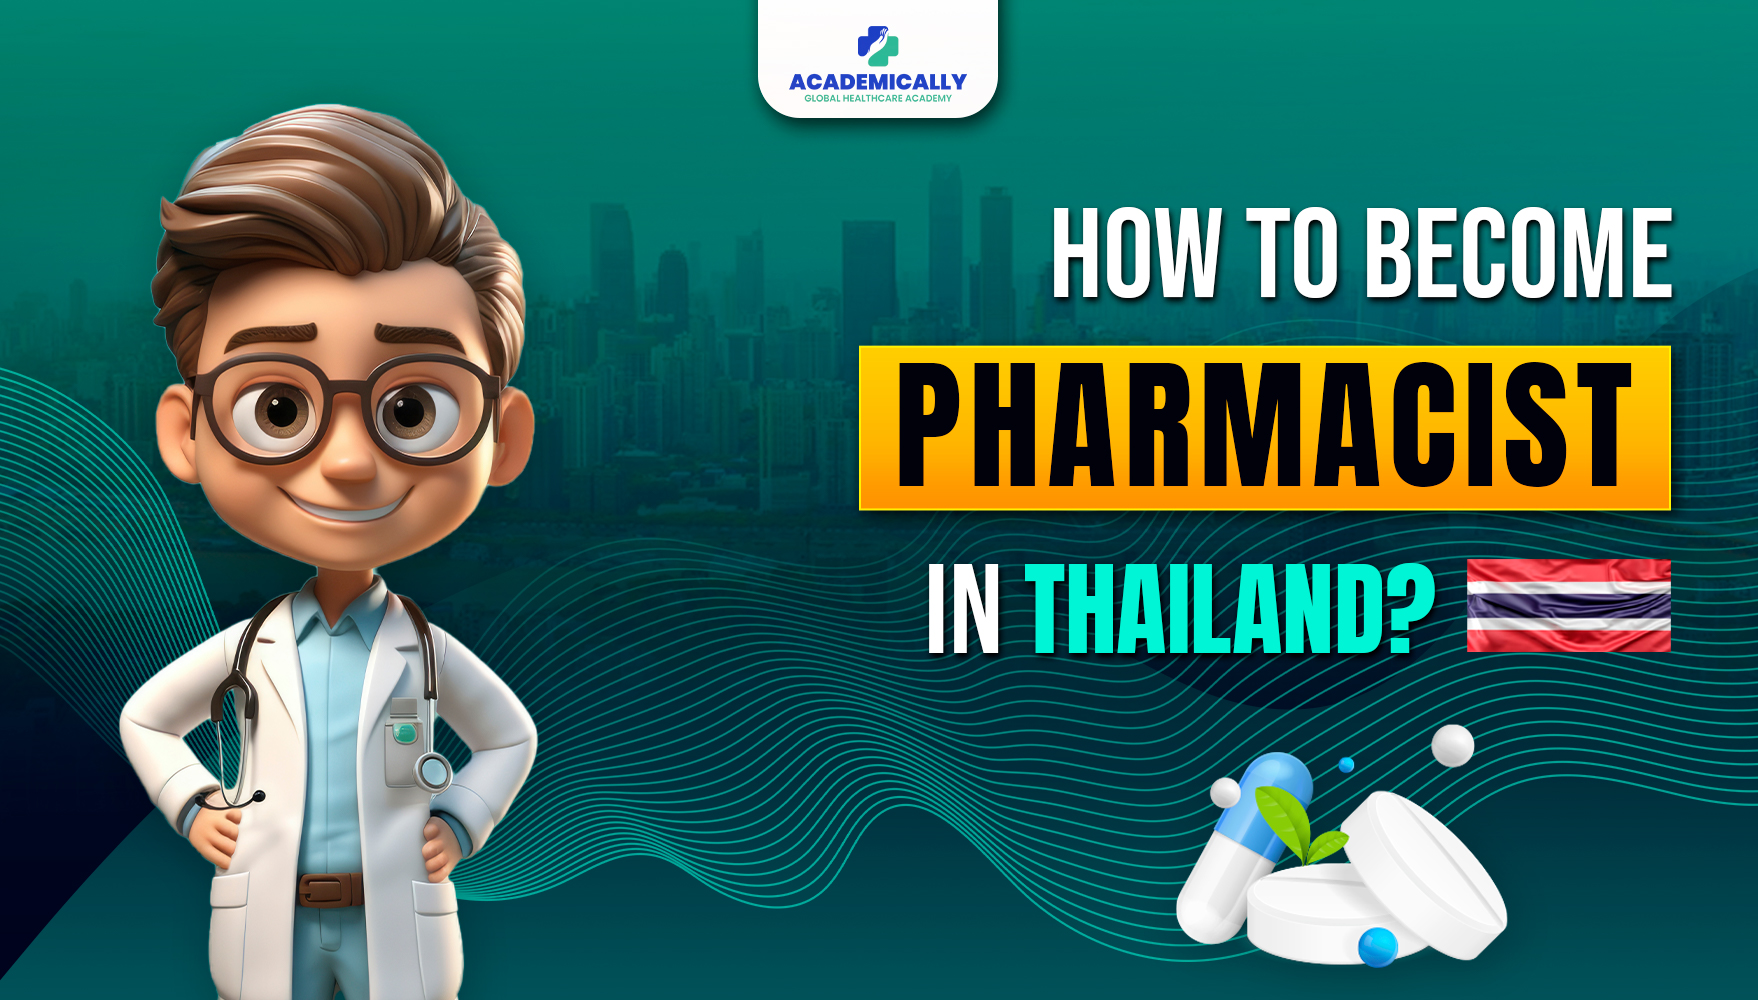 Become a pharmacist in Thailand from any part of the world.